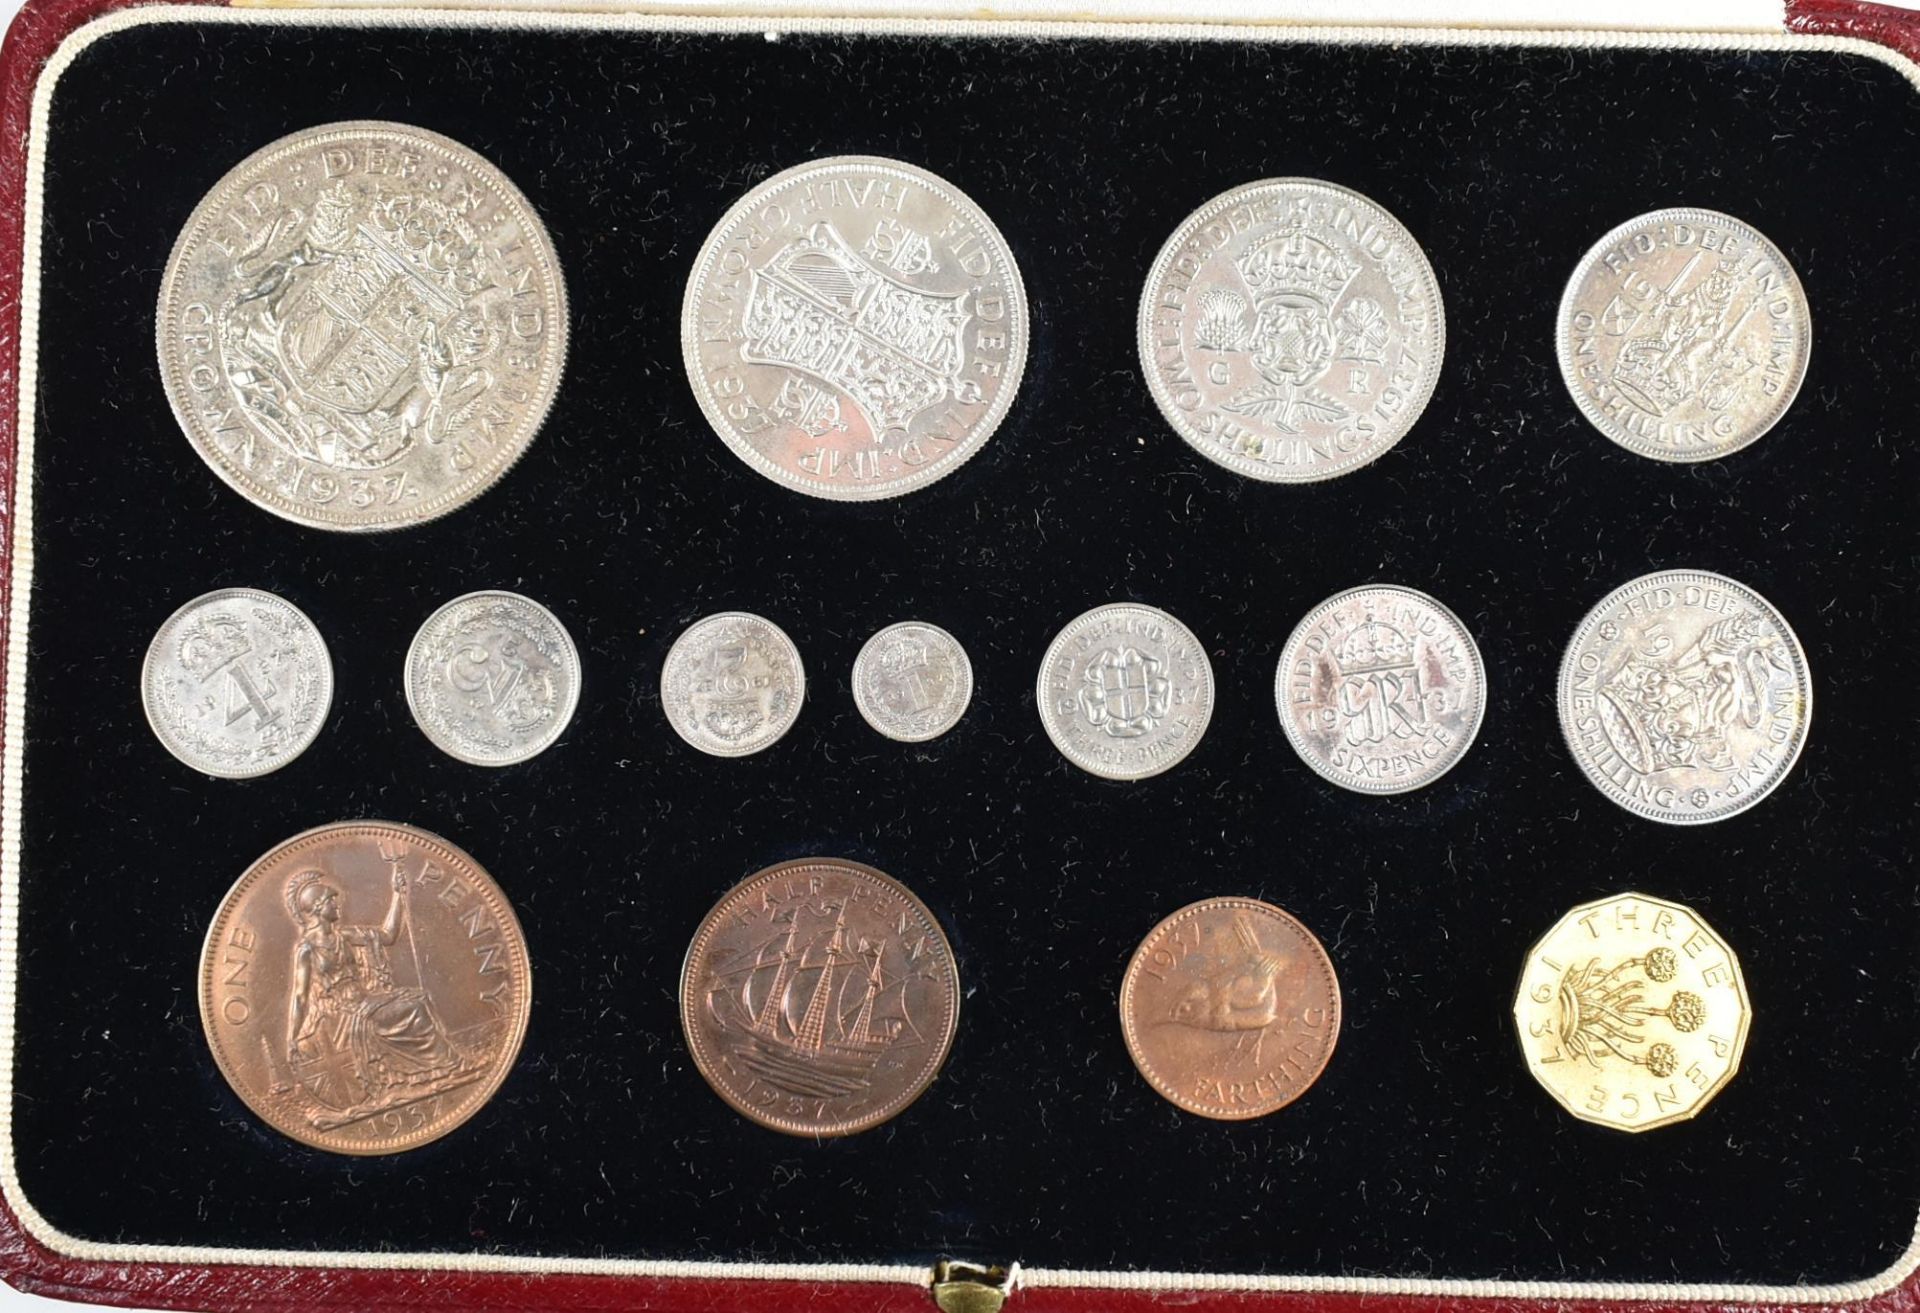 1937 - 15 COIN PROOF SPECIMEN COINS SET IN LEATHER CASE - Image 2 of 4